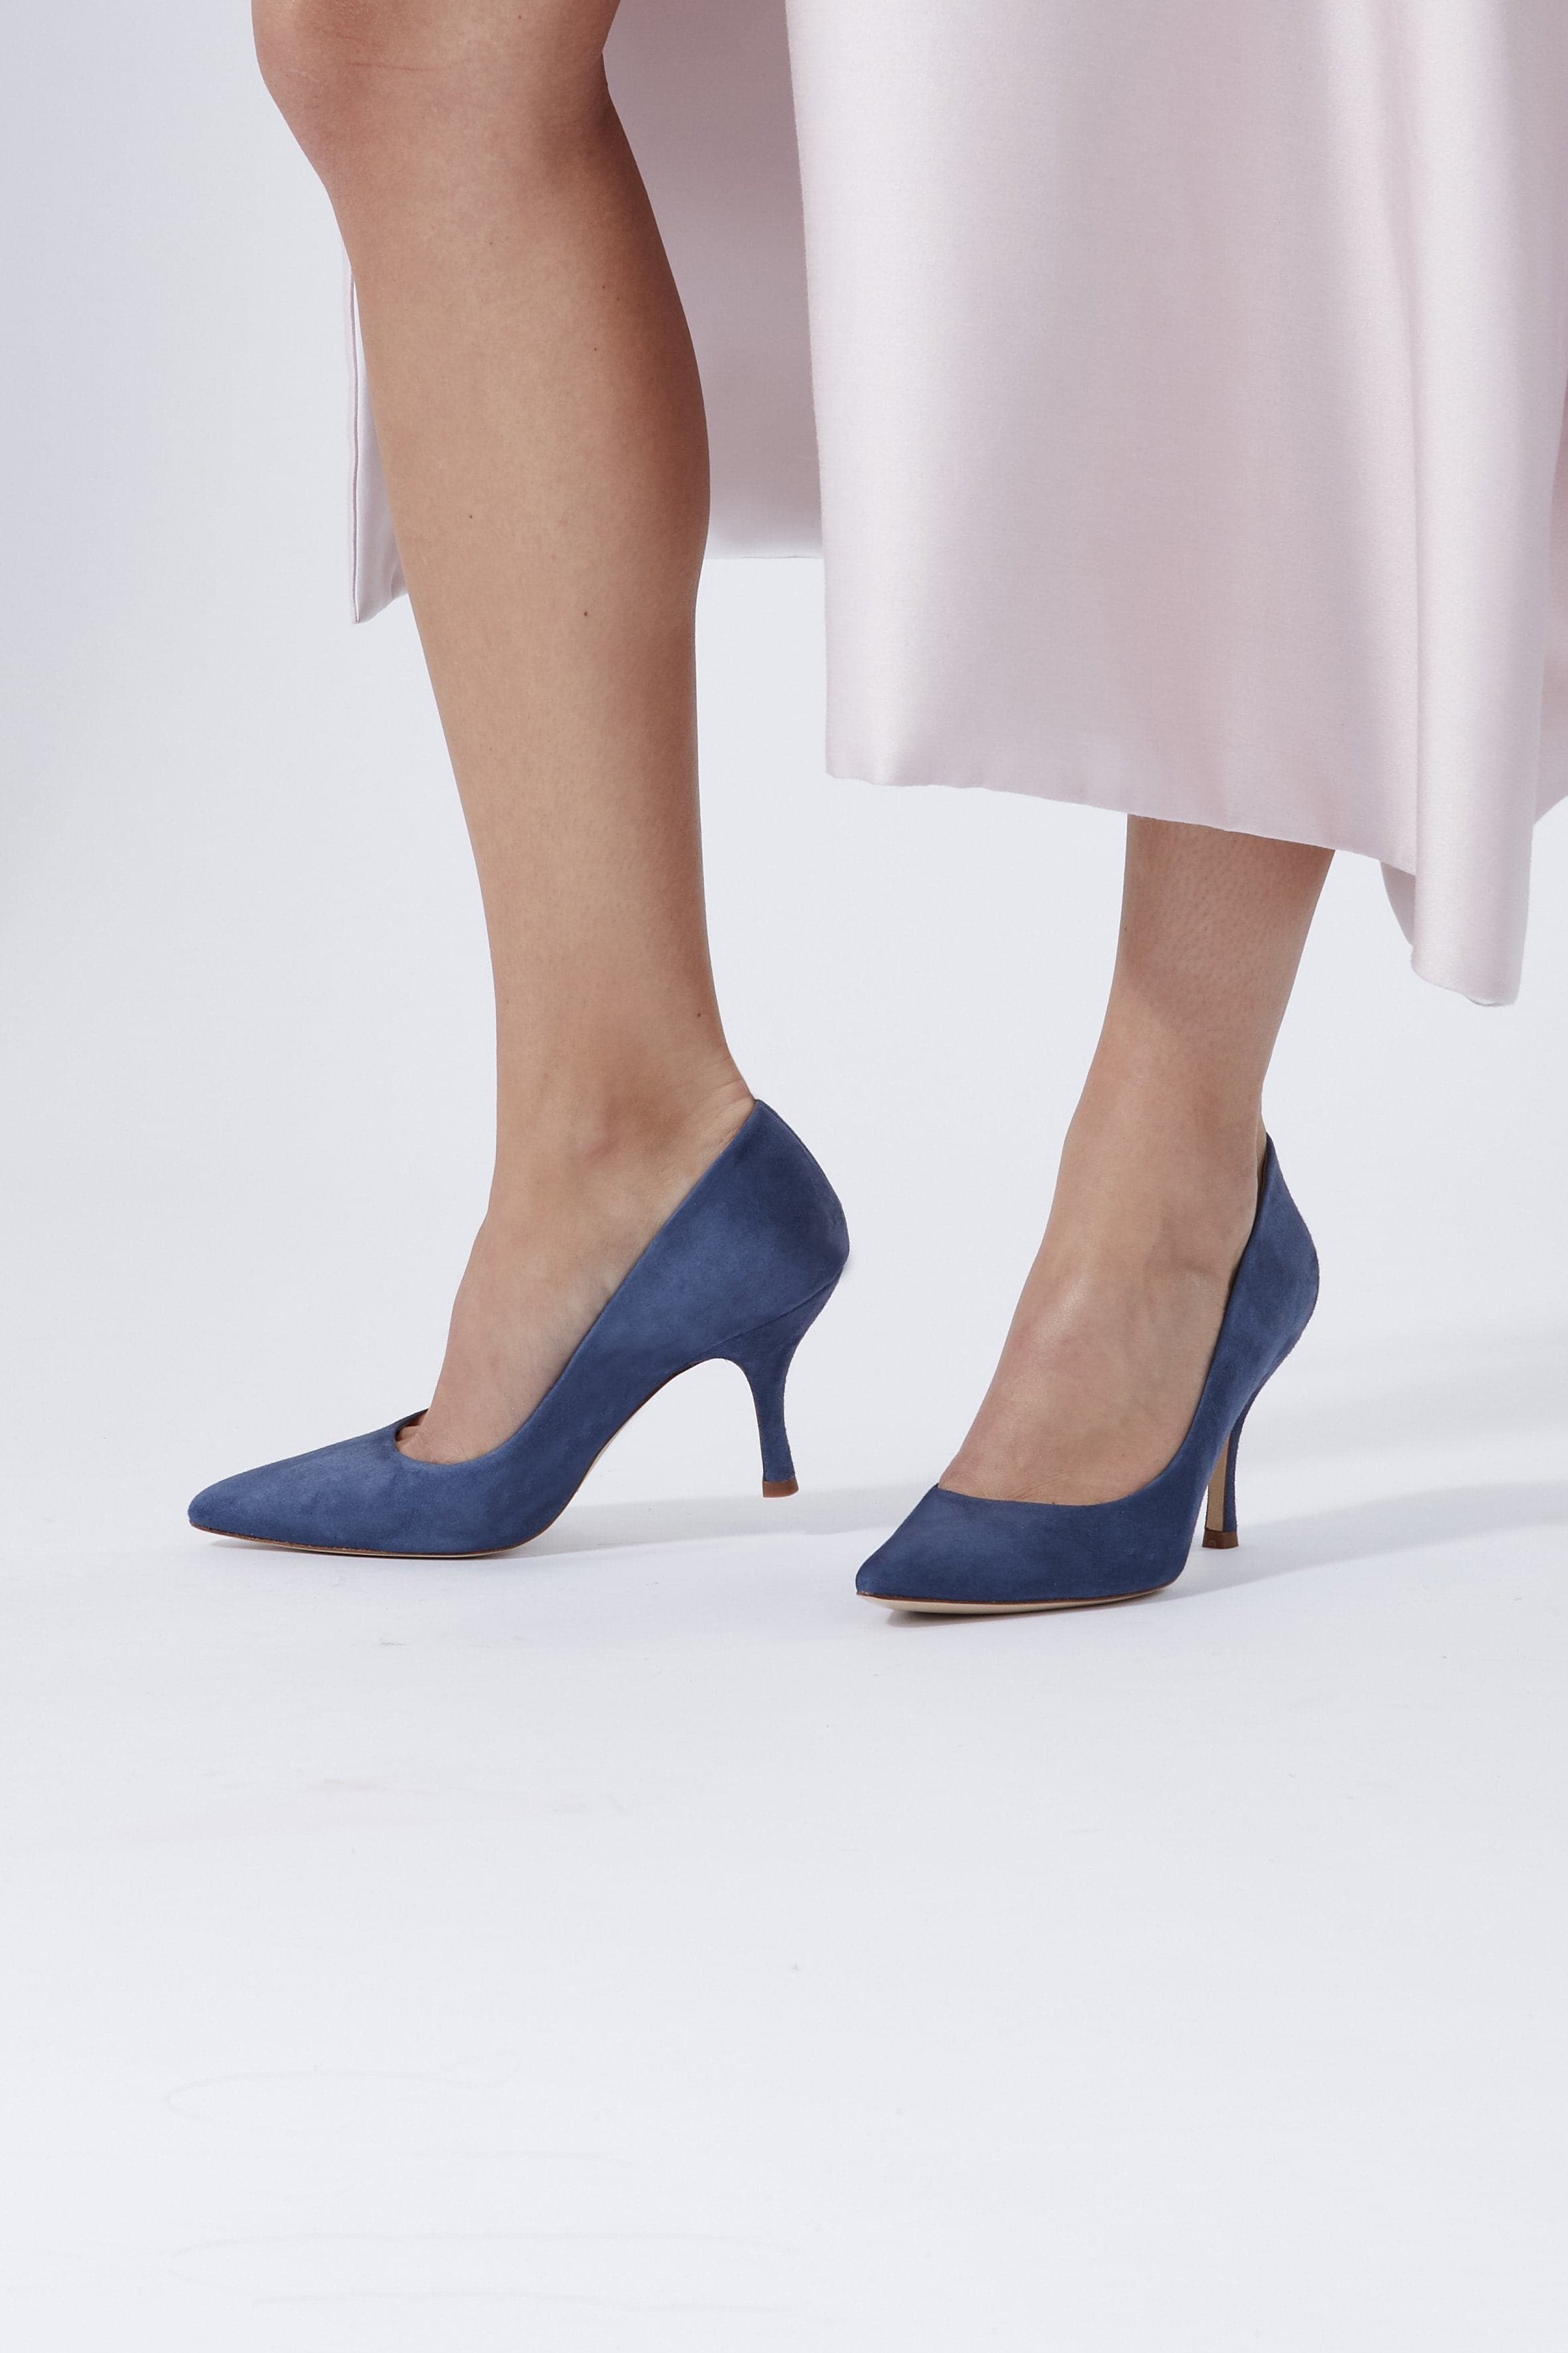 Olivia Riviera Fashion Shoe Blue-Grey Suede Pointed Court image